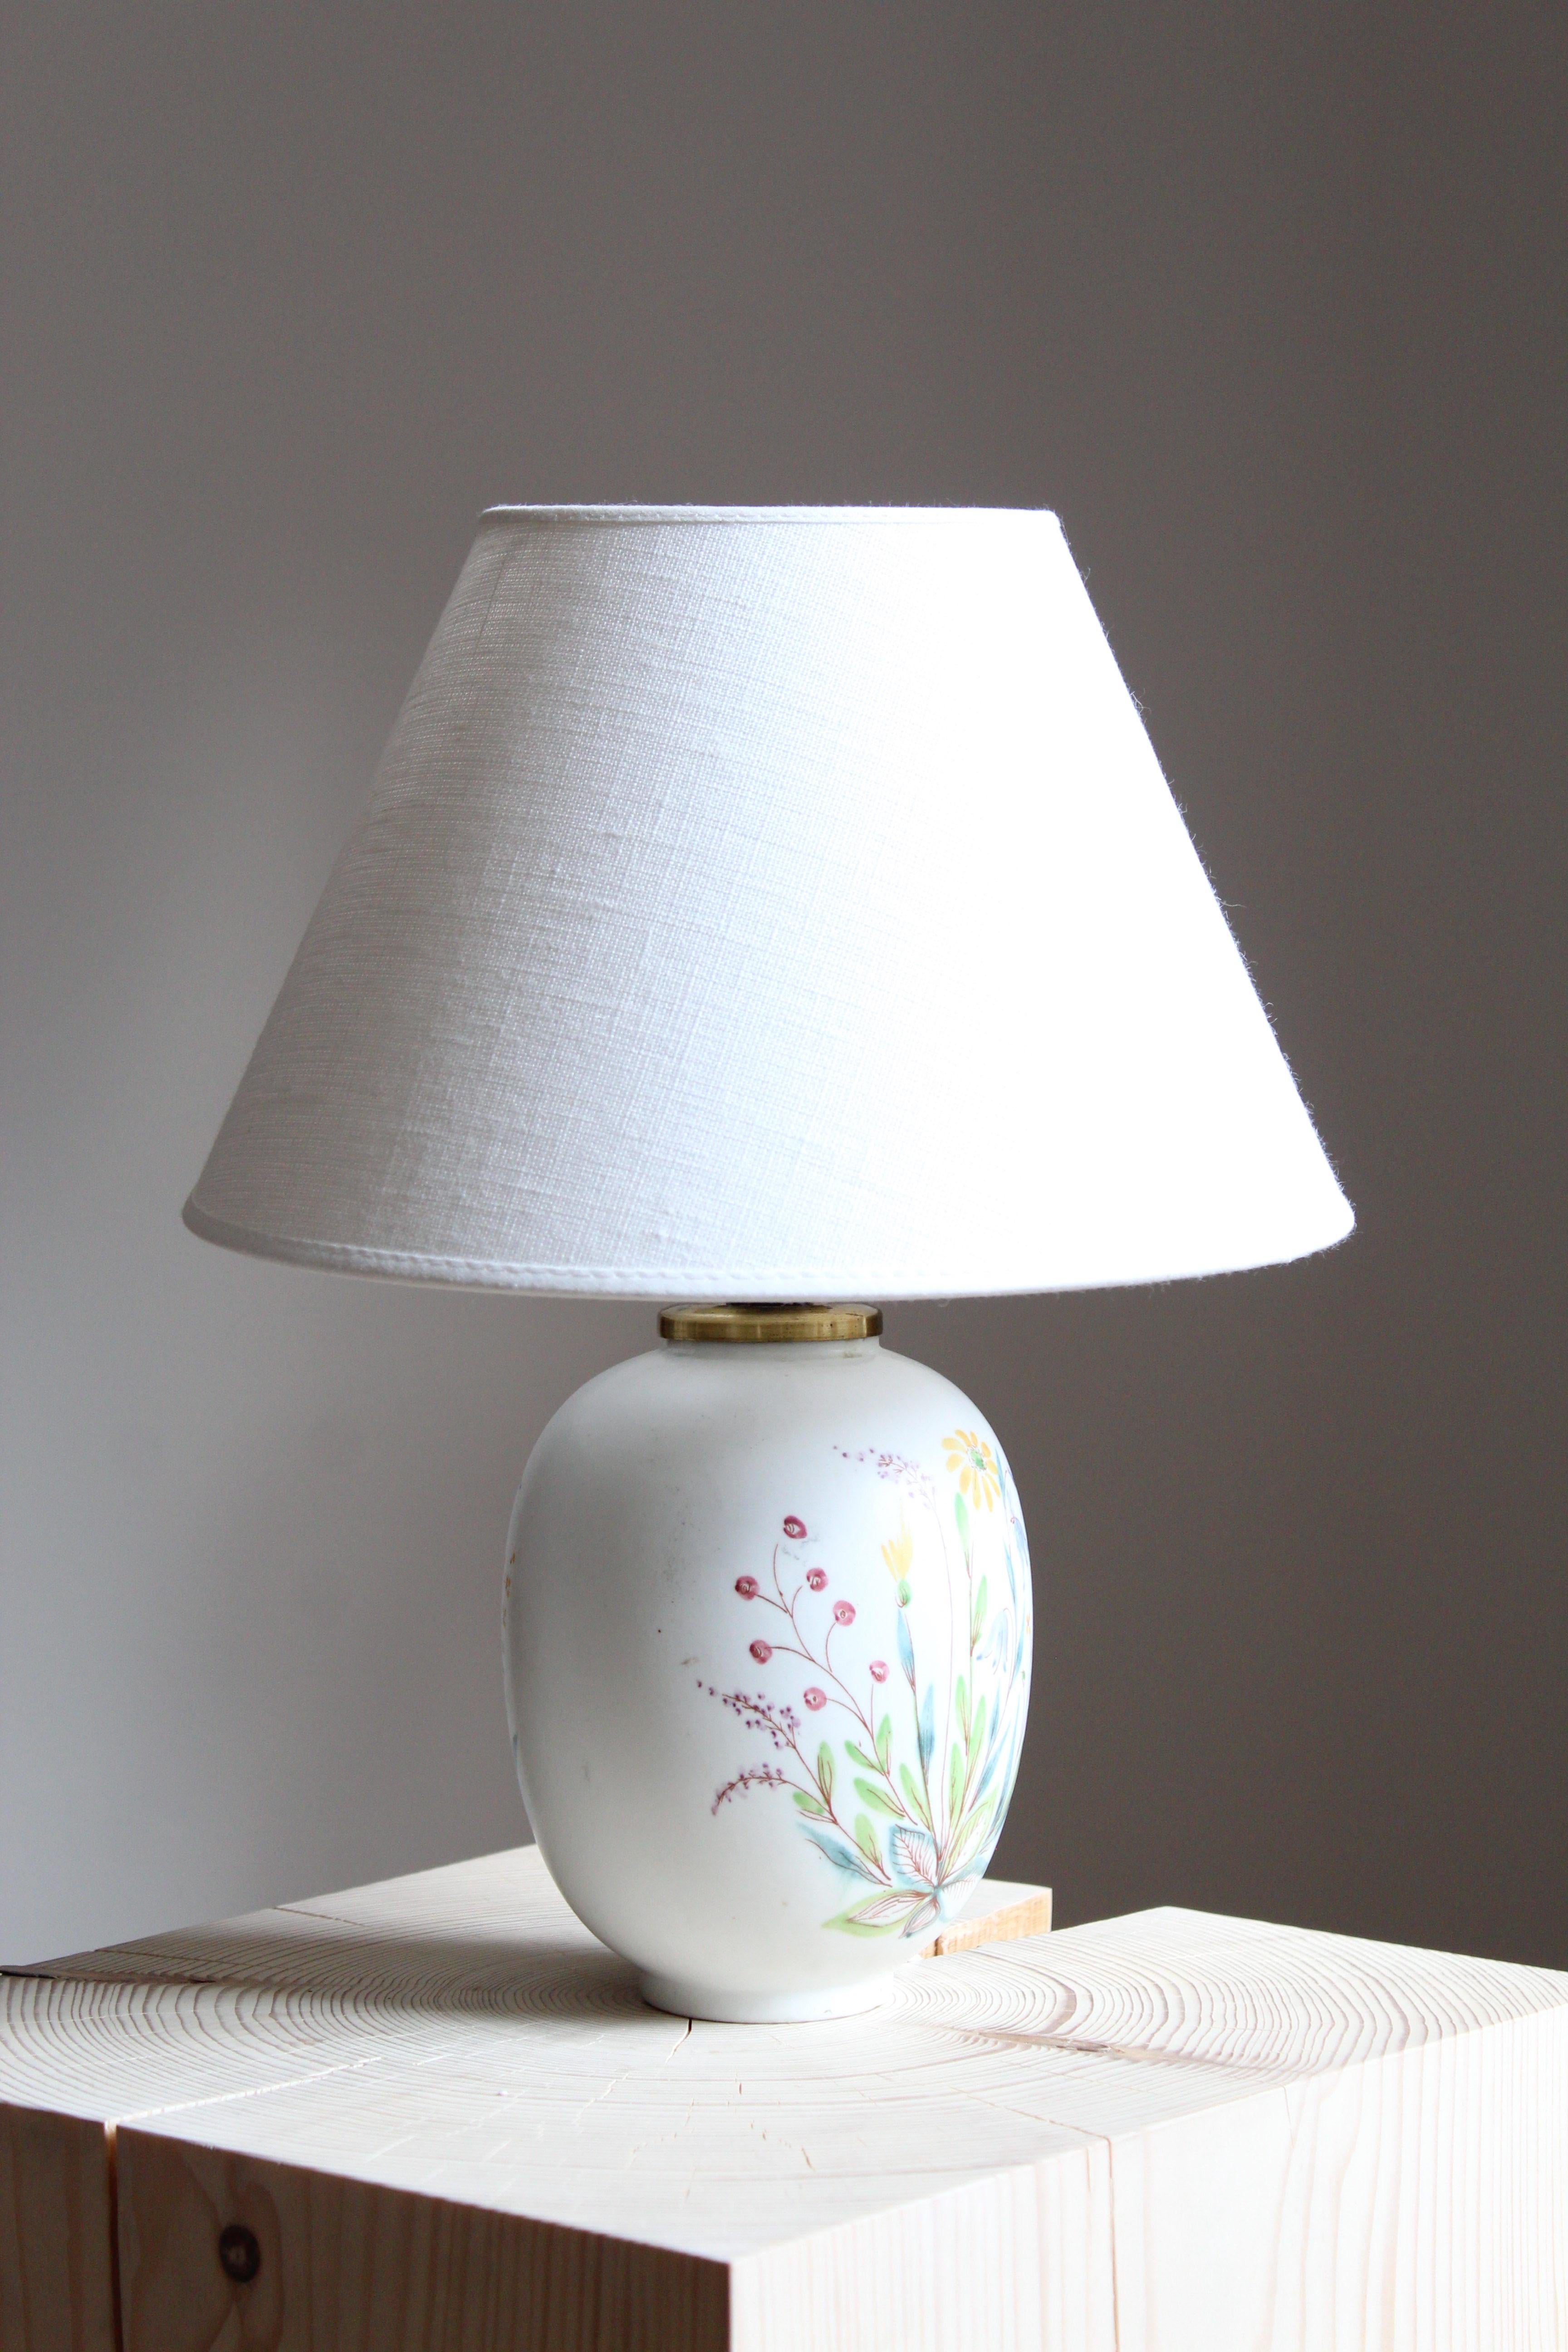 A rare and sizable table lamp by Carl-Harry Stålhane for the iconic Swedish firm Rörstrand. Features hand painted floral motifs, 1950s, Sweden. Marked. Stoneware or earthenware.

Sold without lampshade. Stated dimensions excluding